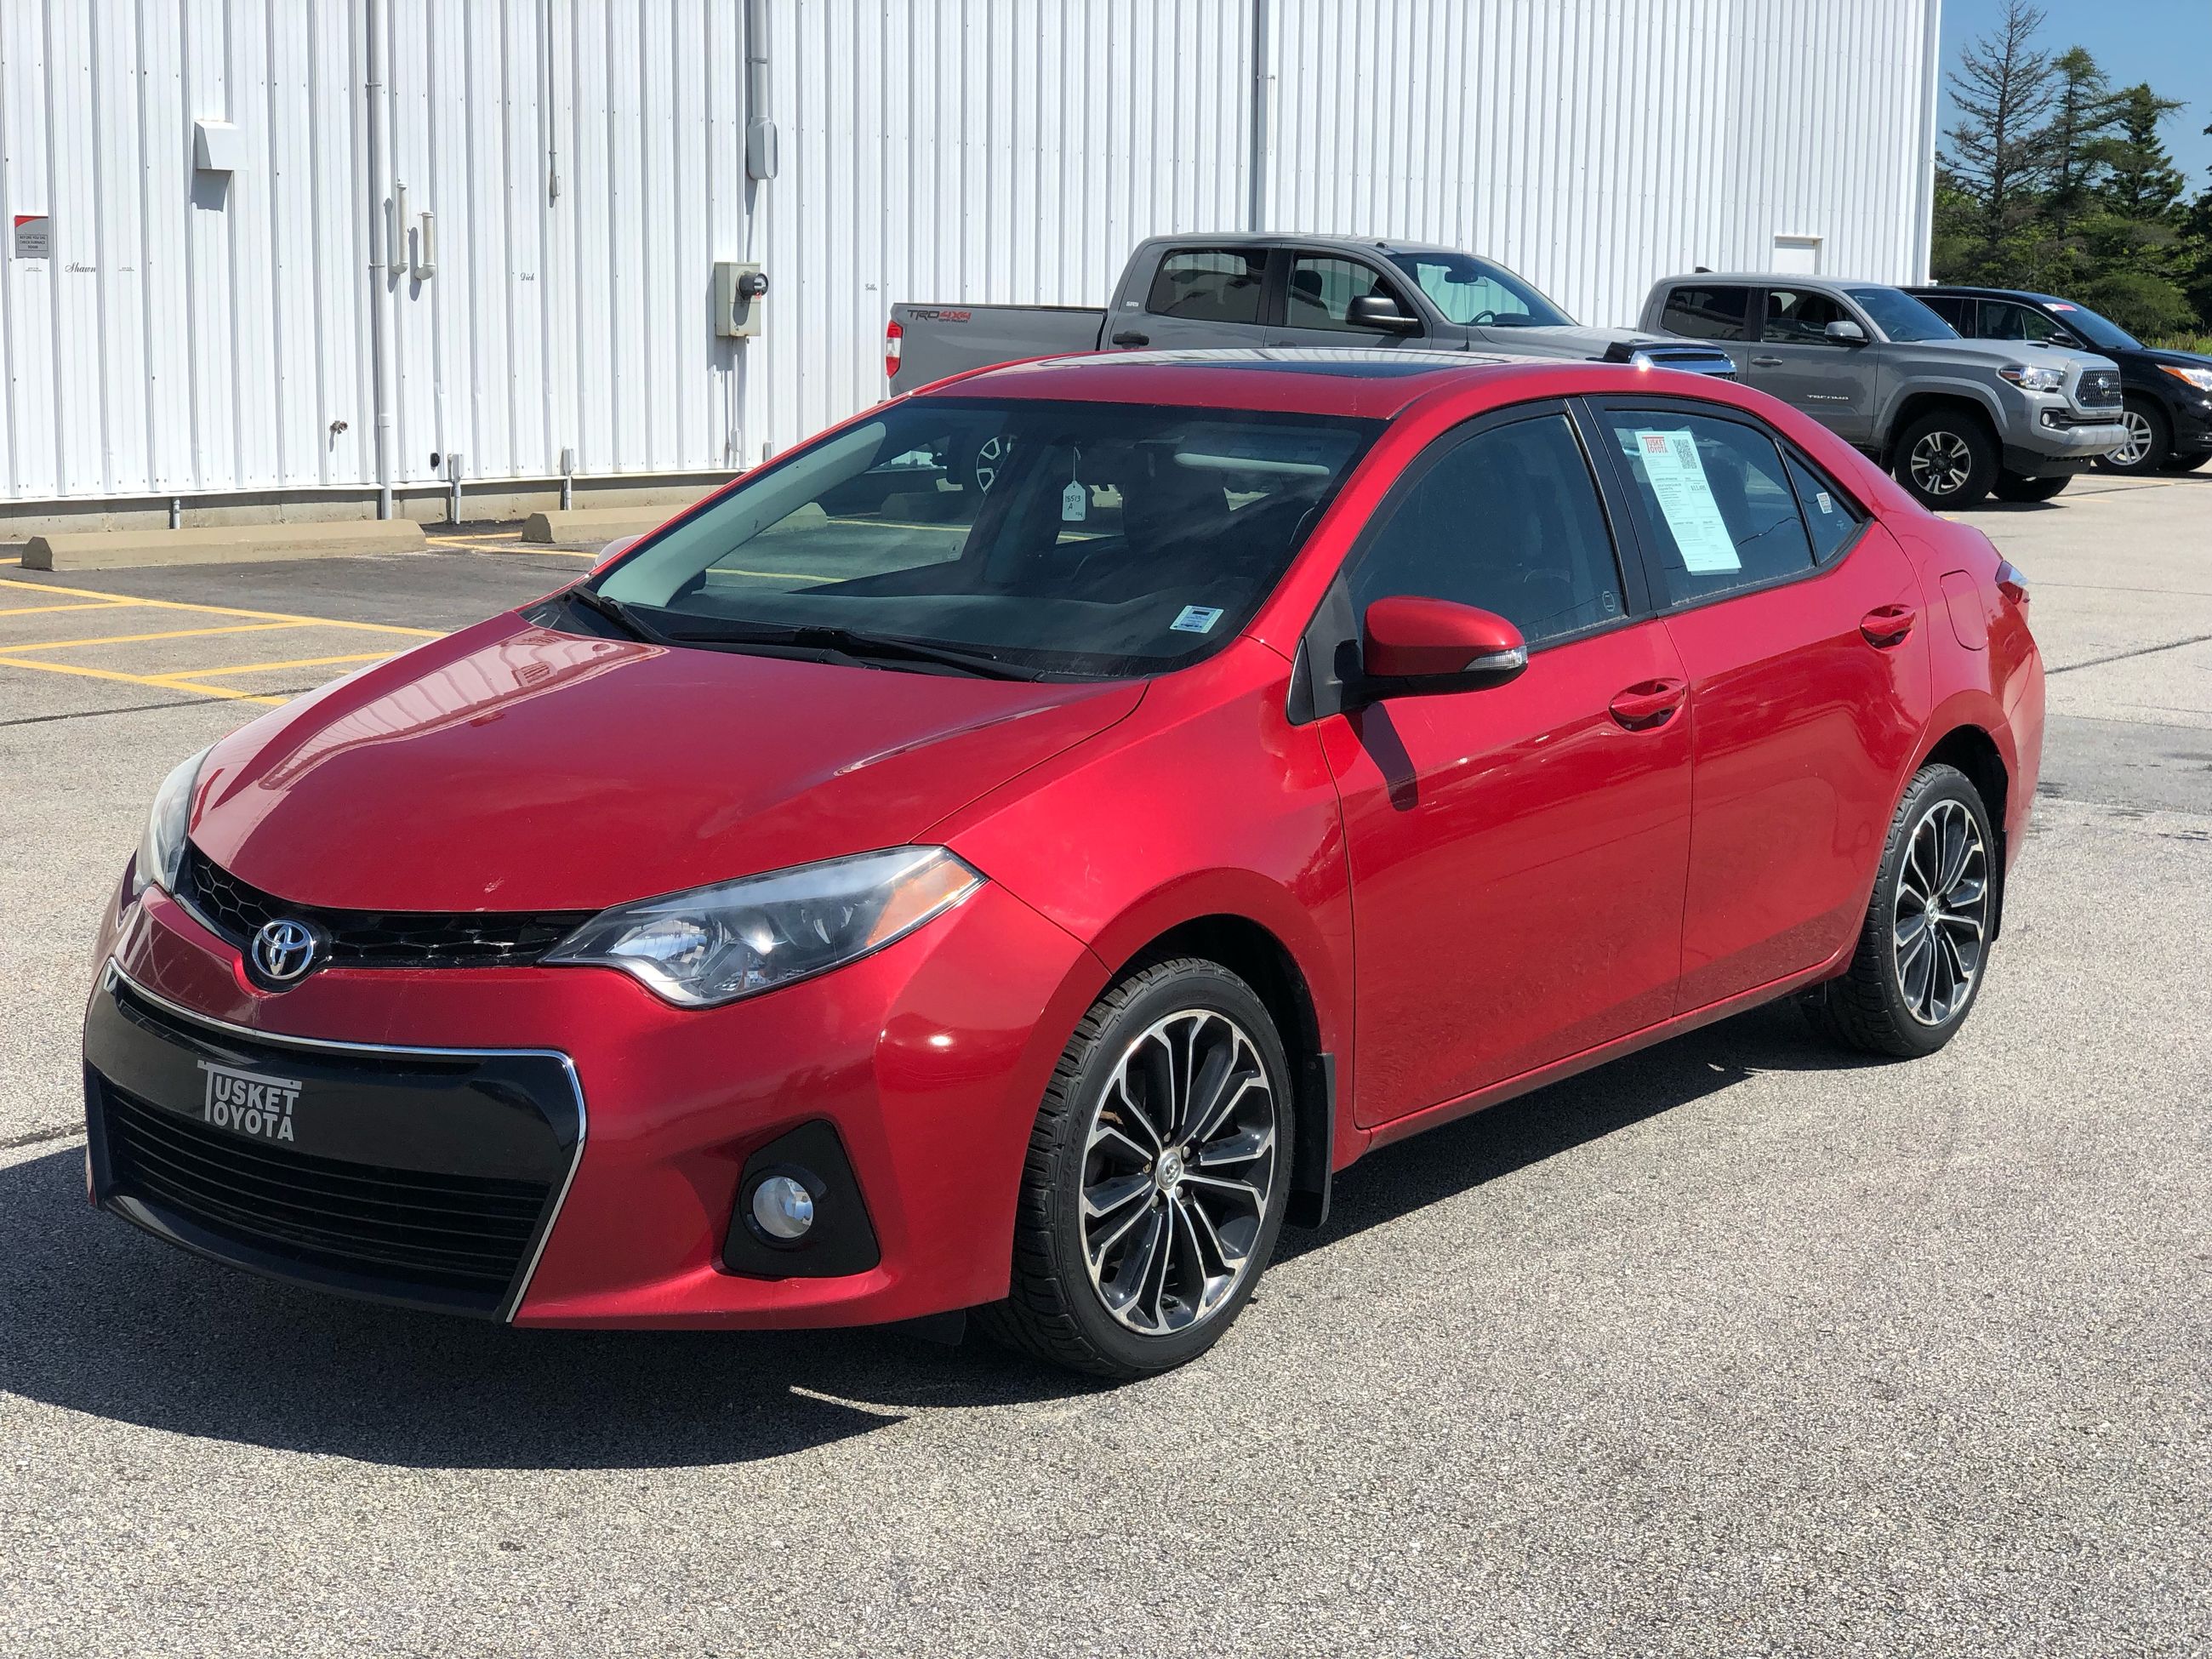 Used 2014 Toyota Corolla SE Upgrade Pkg in Yarmouth Used